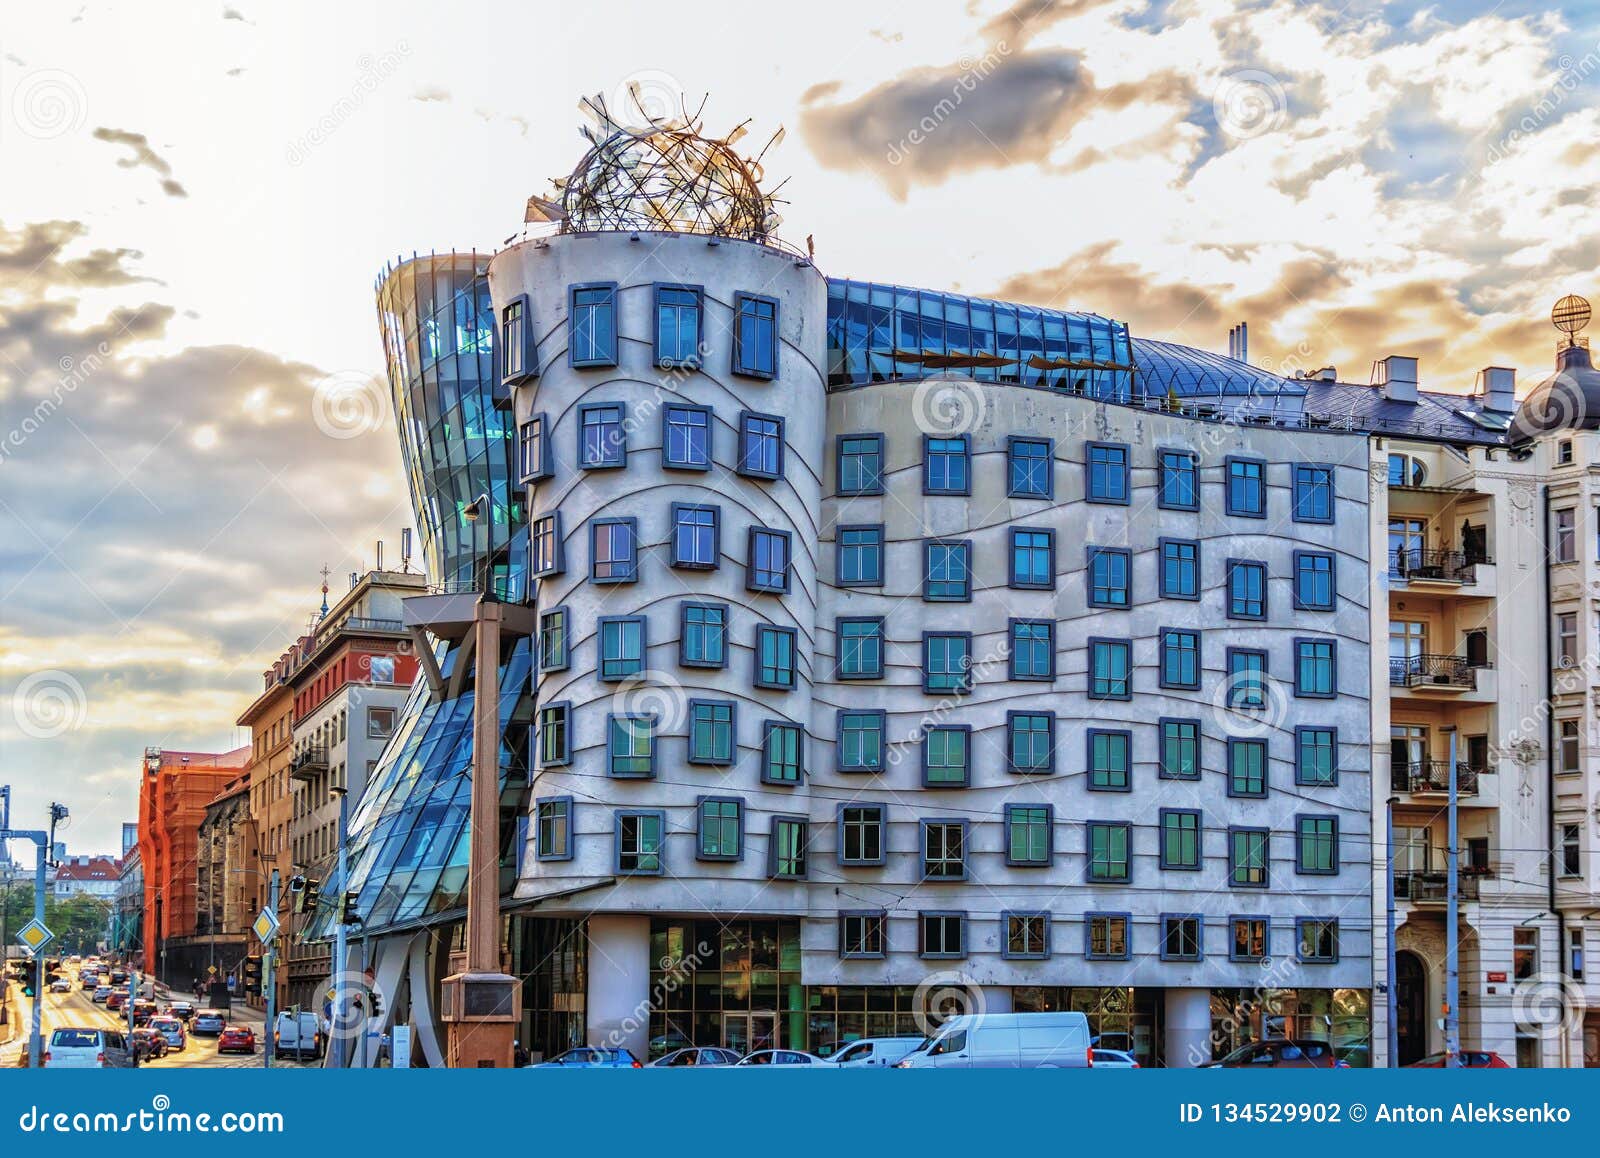 Dancing House or Fred Ginger in Prague Editorial Photography - Image of exterior, 134529902